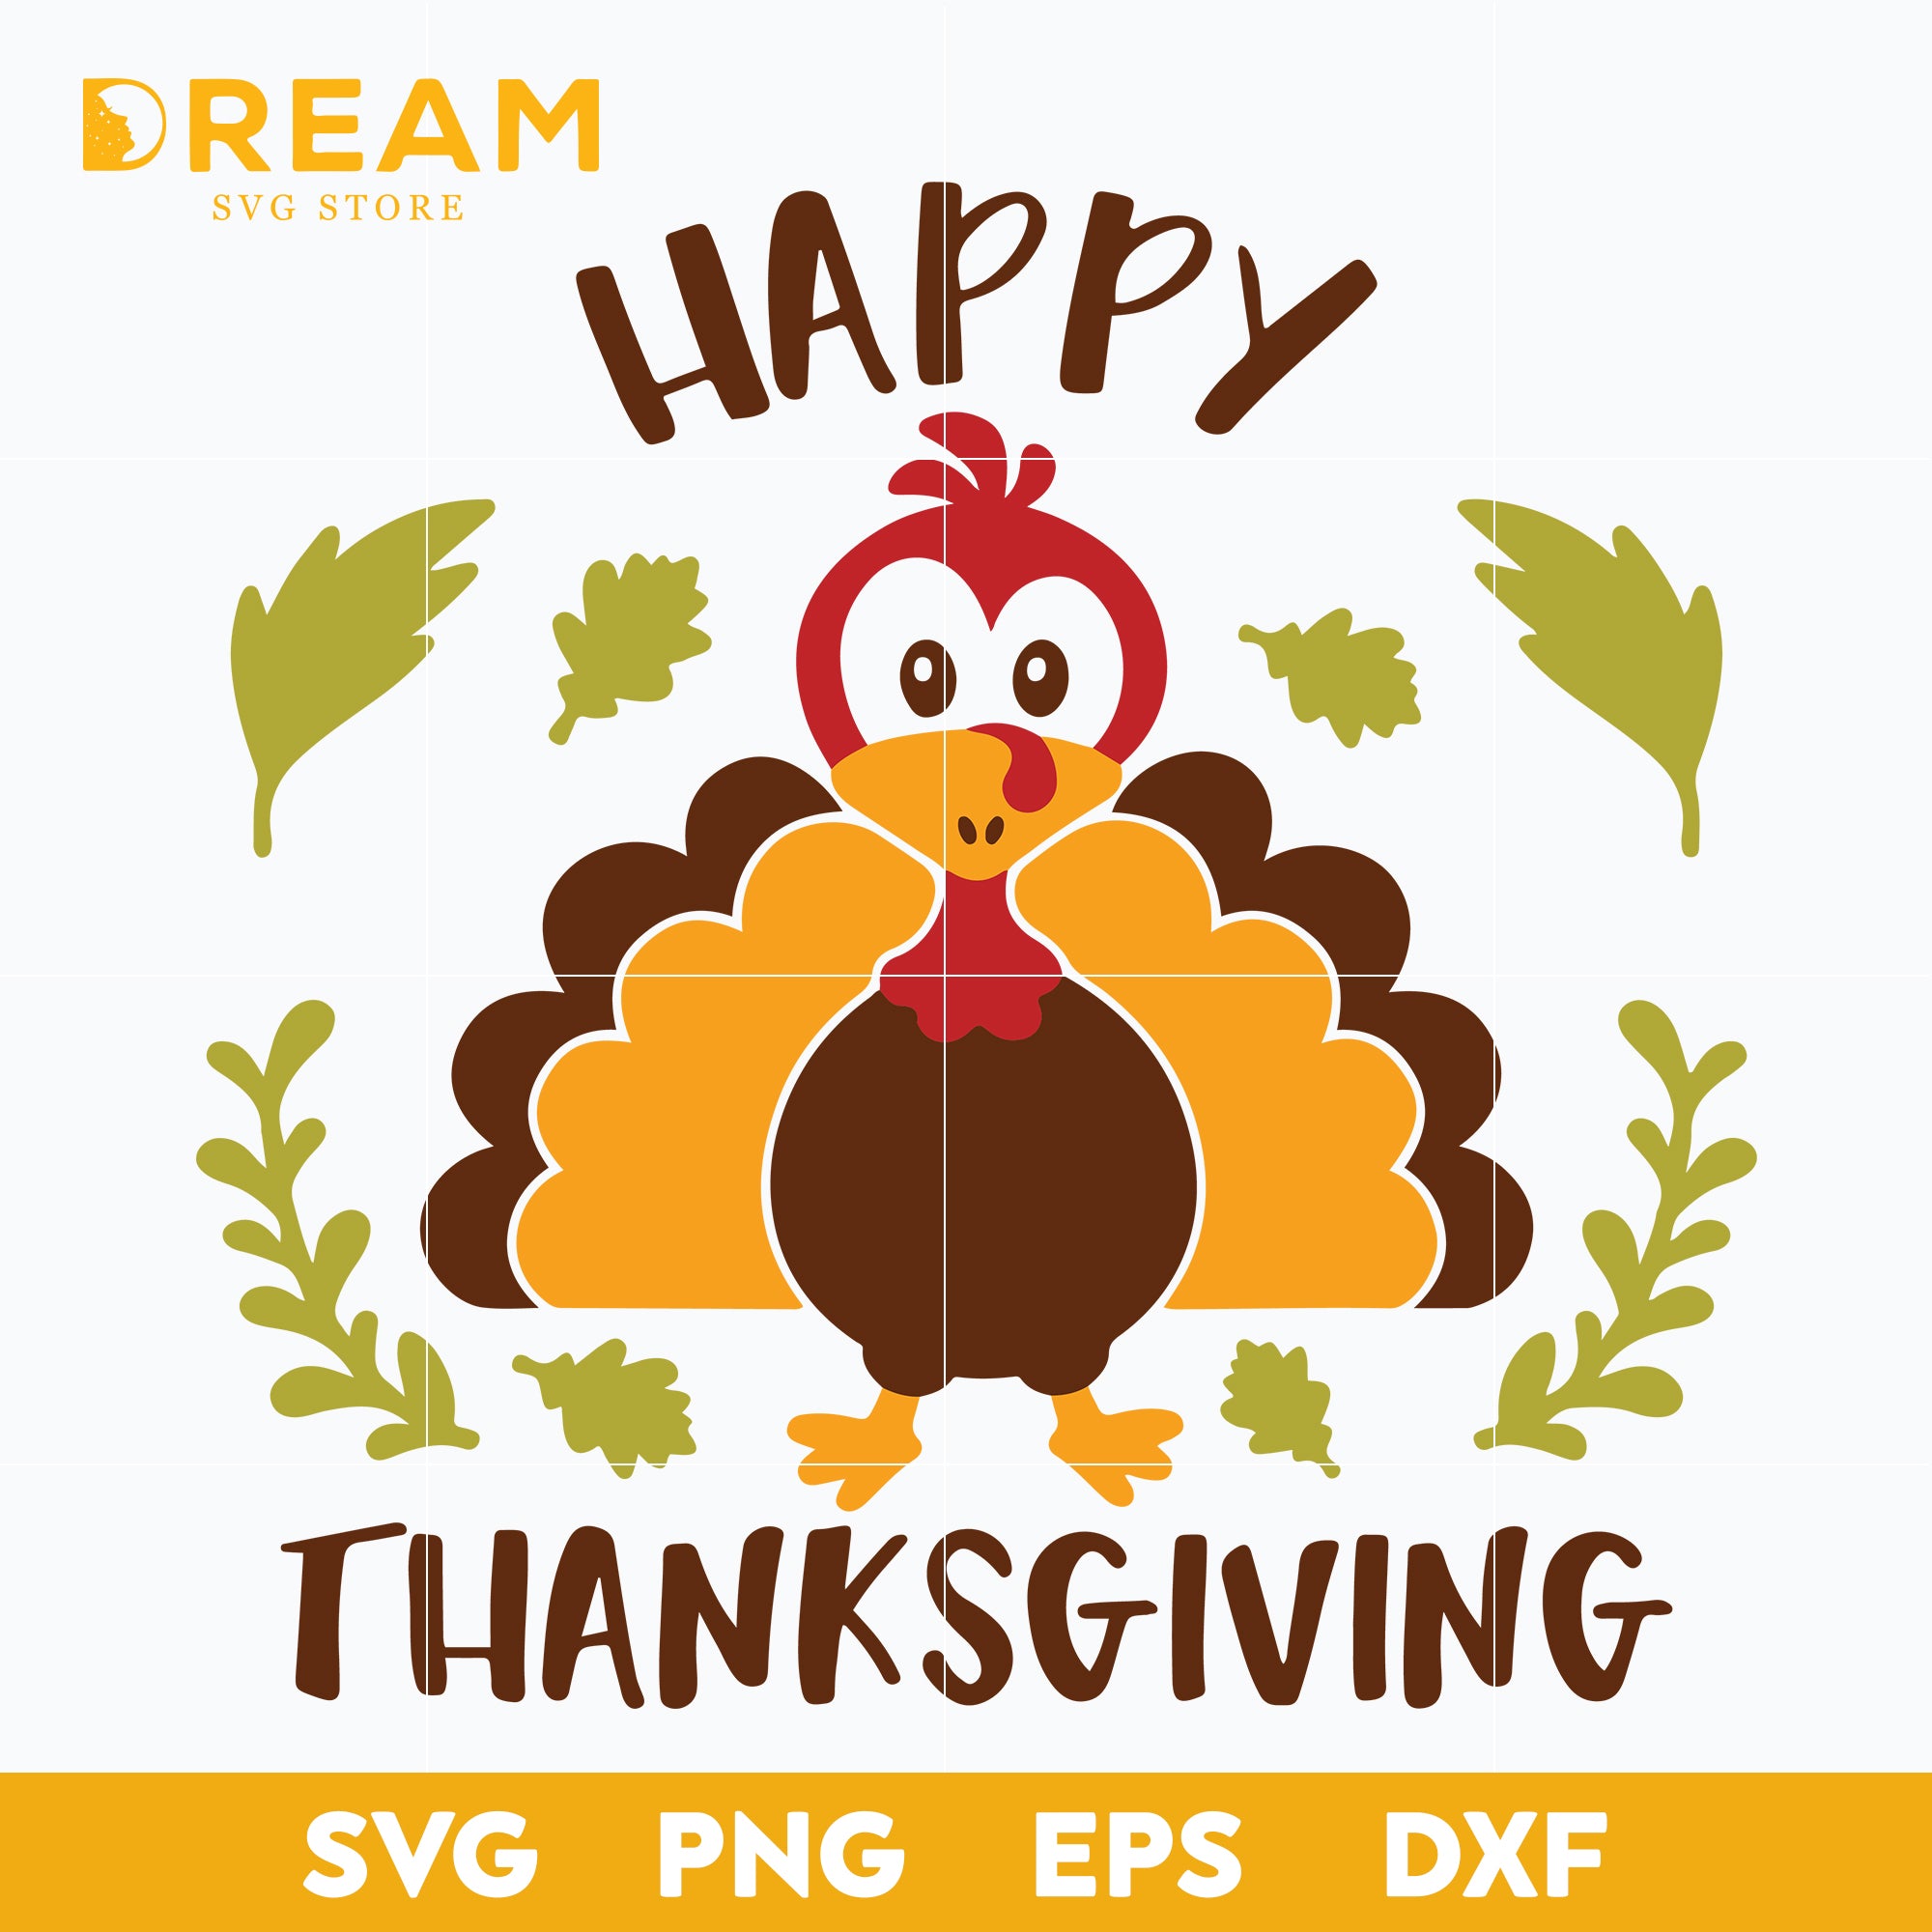 Download Happy Thanksgiving Svg Thanksgiving Day Svg Png Dxf Eps Digital Fi Dreamsvg Store